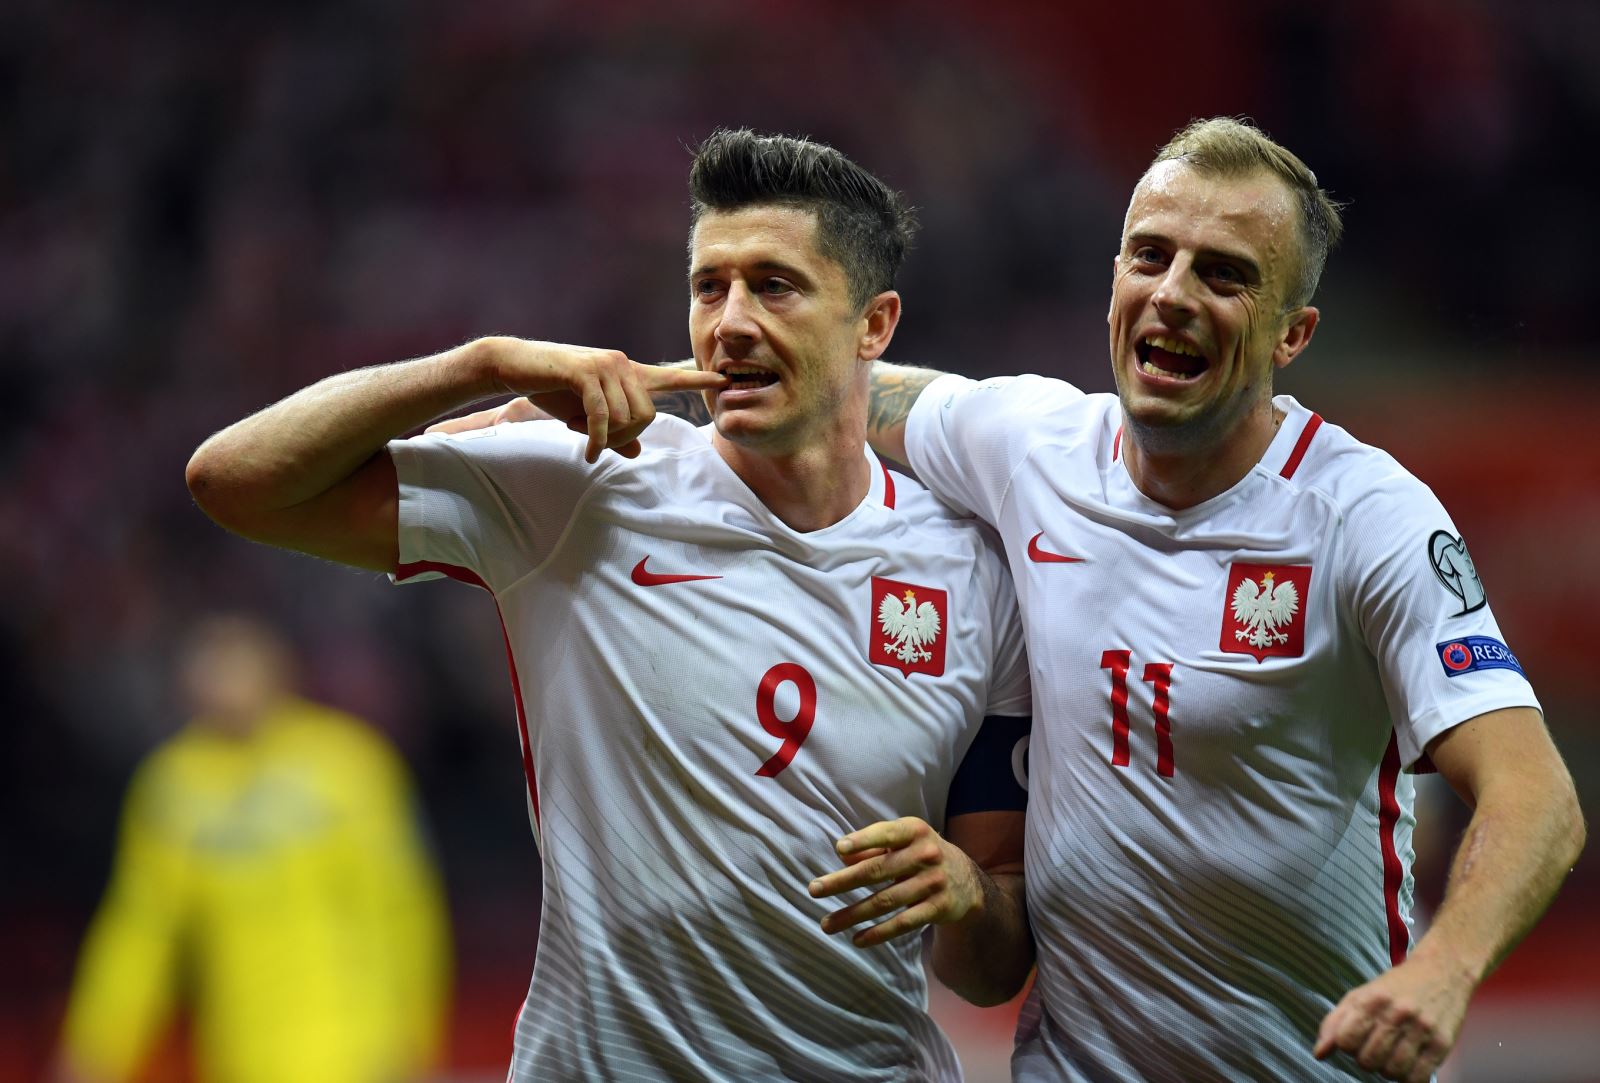 Poland are among the teams who have qualified for this year's World Cup